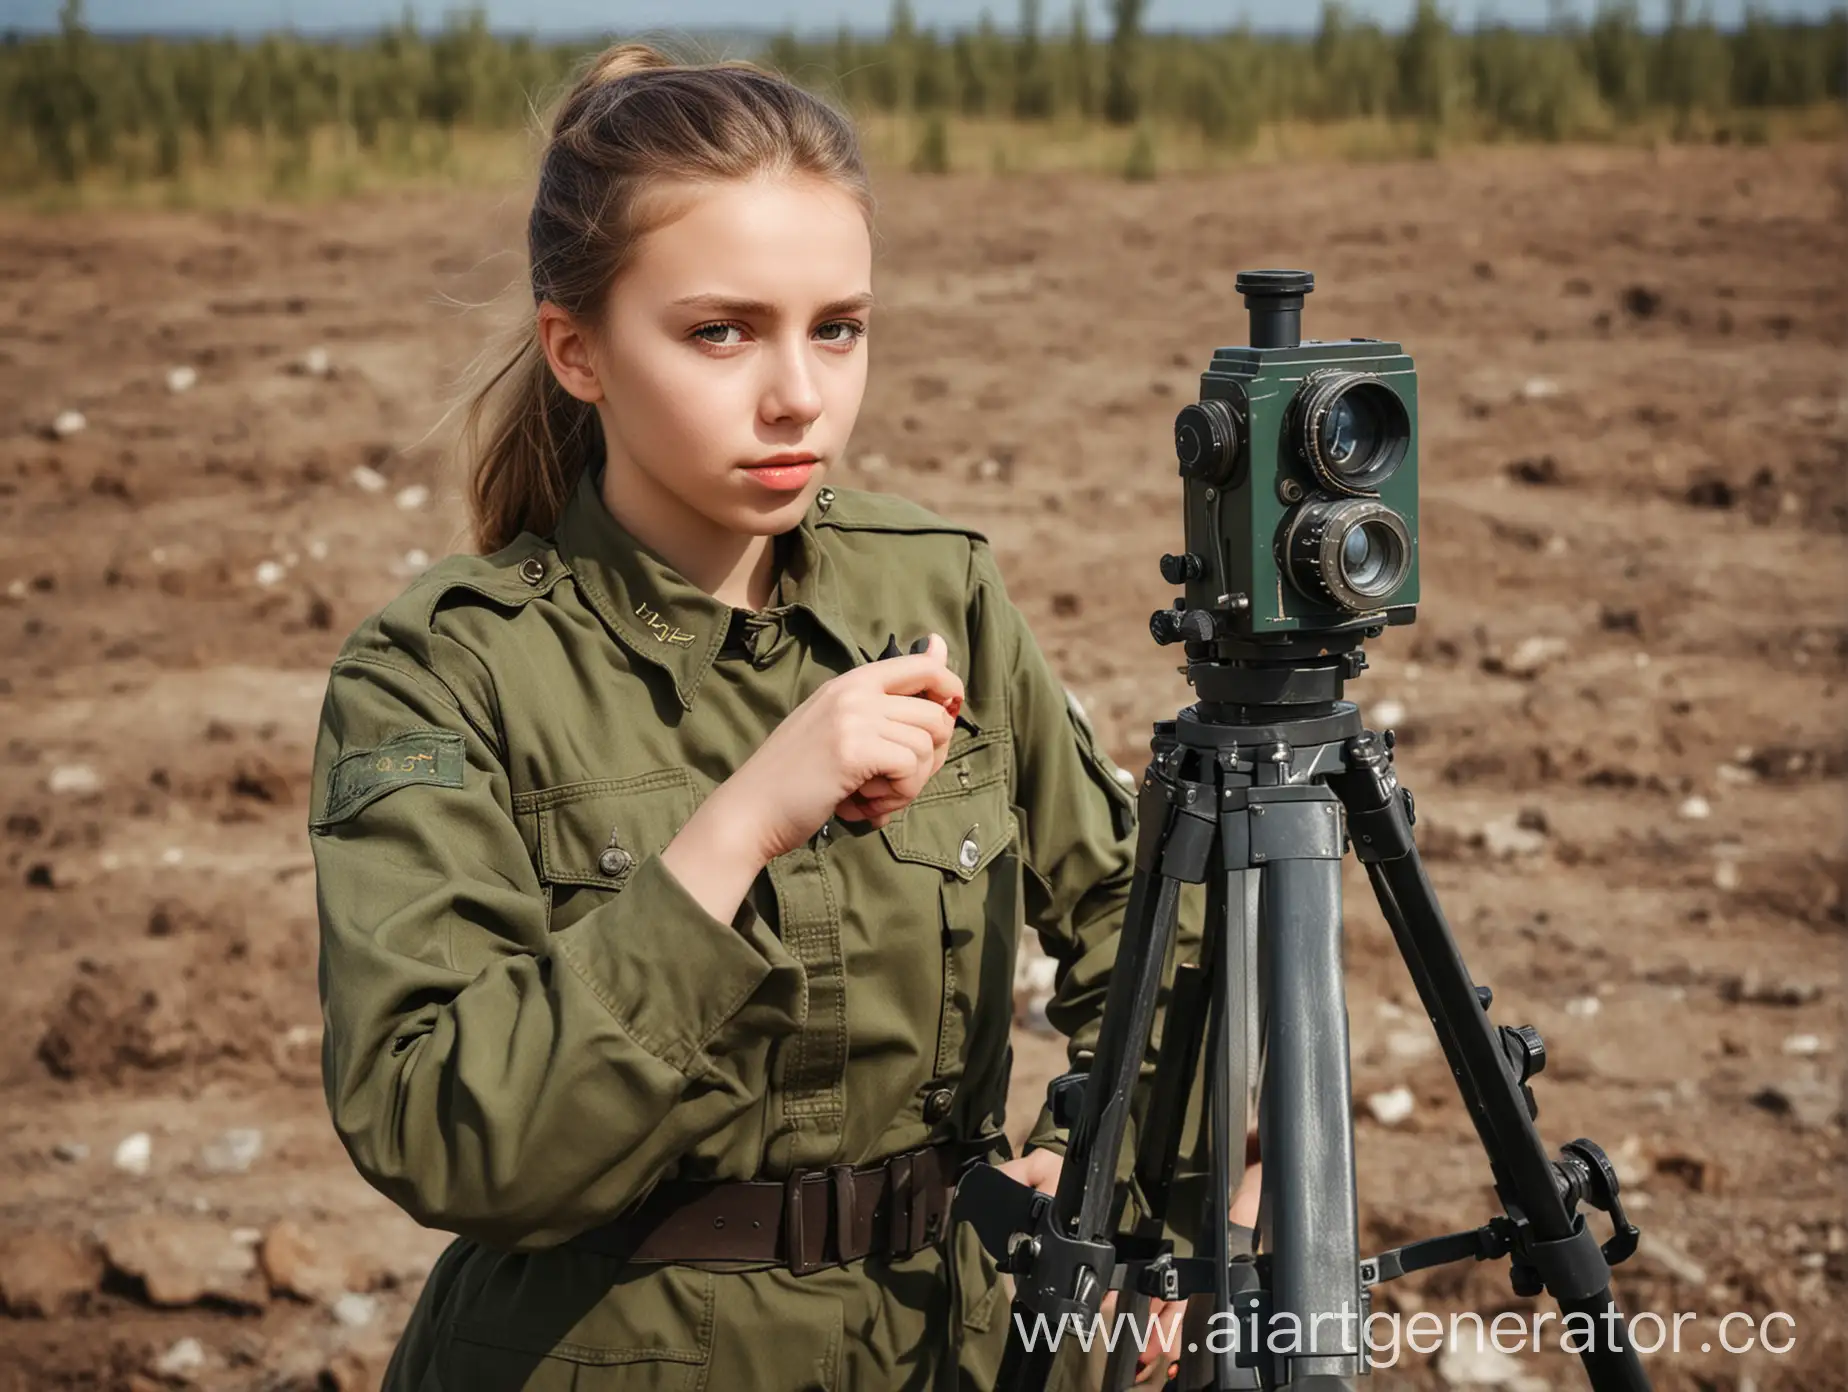 Young-Female-Soldier-Operating-Theodolite-on-Battlefield